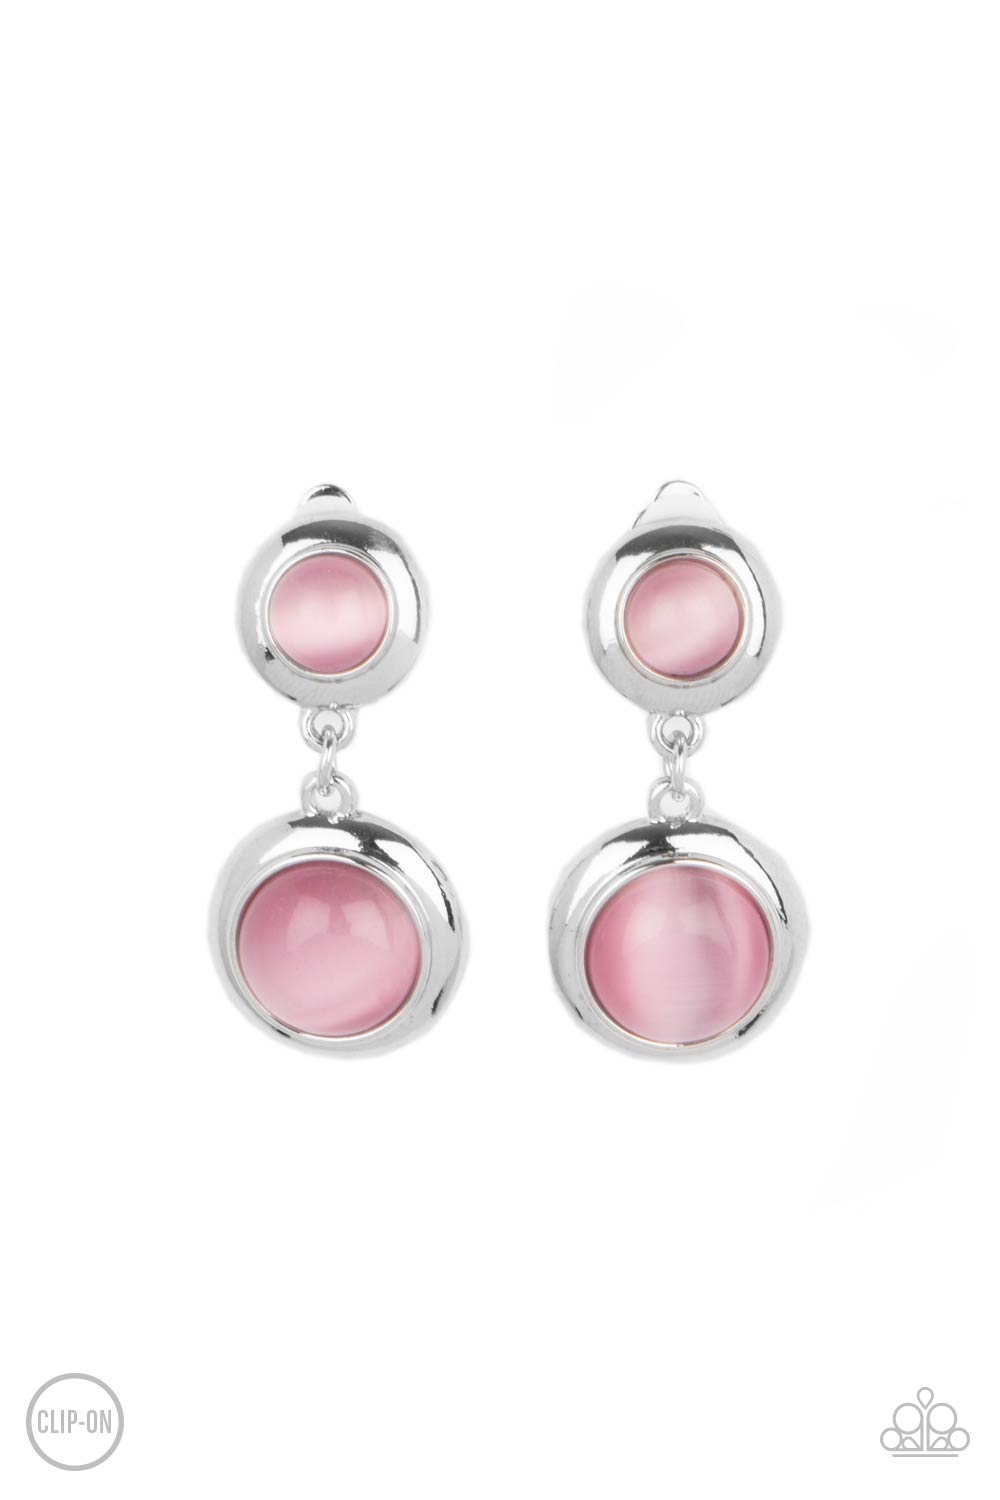 PRE-ORDER - Paparazzi Subtle Smolder - Pink - Clip On Earrings - $5 Jewelry with Ashley Swint